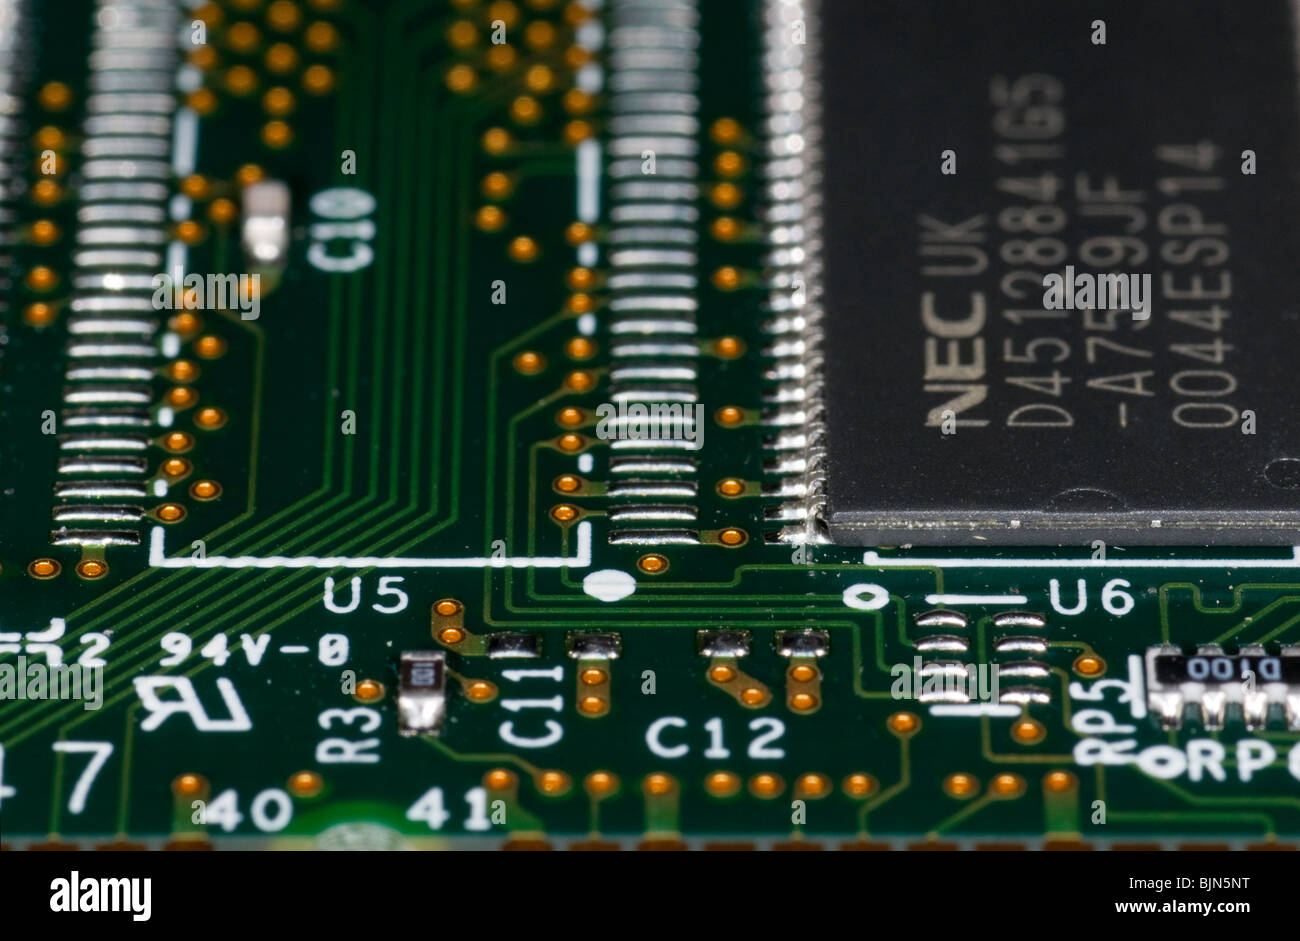 close up photograph of computer RAM memory chips Stock Photo